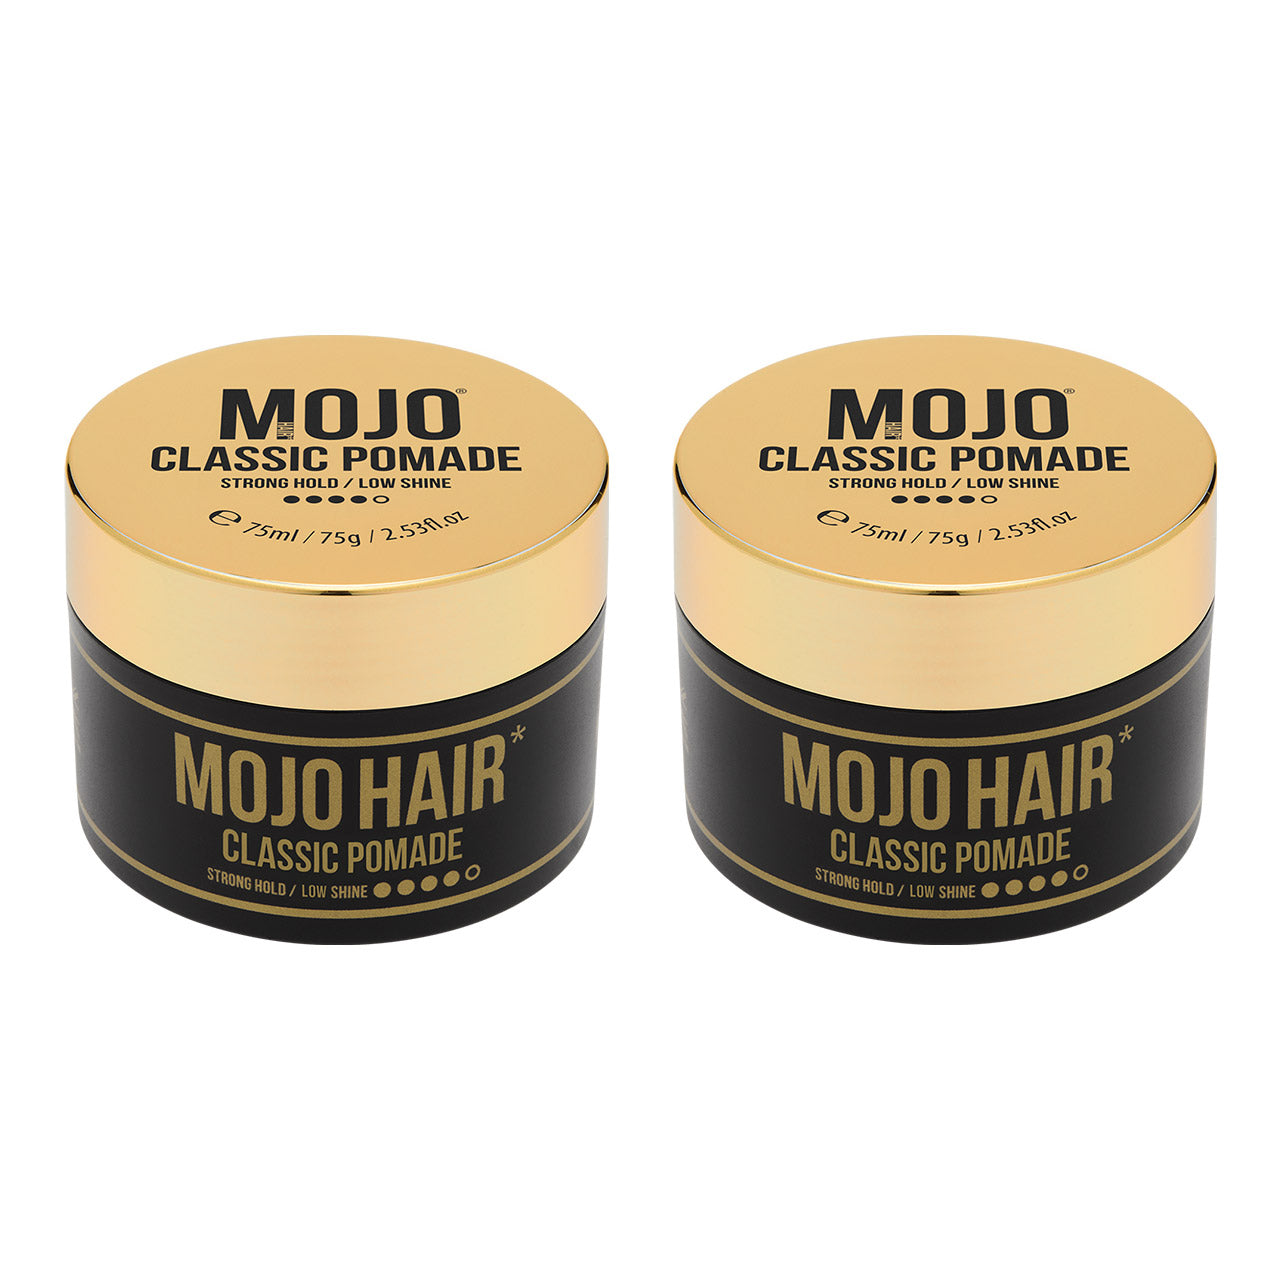 Mojo Hair Classic Pomade (75ml / 75g / 2.53fl.oz) x 2 pack Gold lid and black tub featuring styling retro twist copy design highlighting product benefits Strong hold - low shine